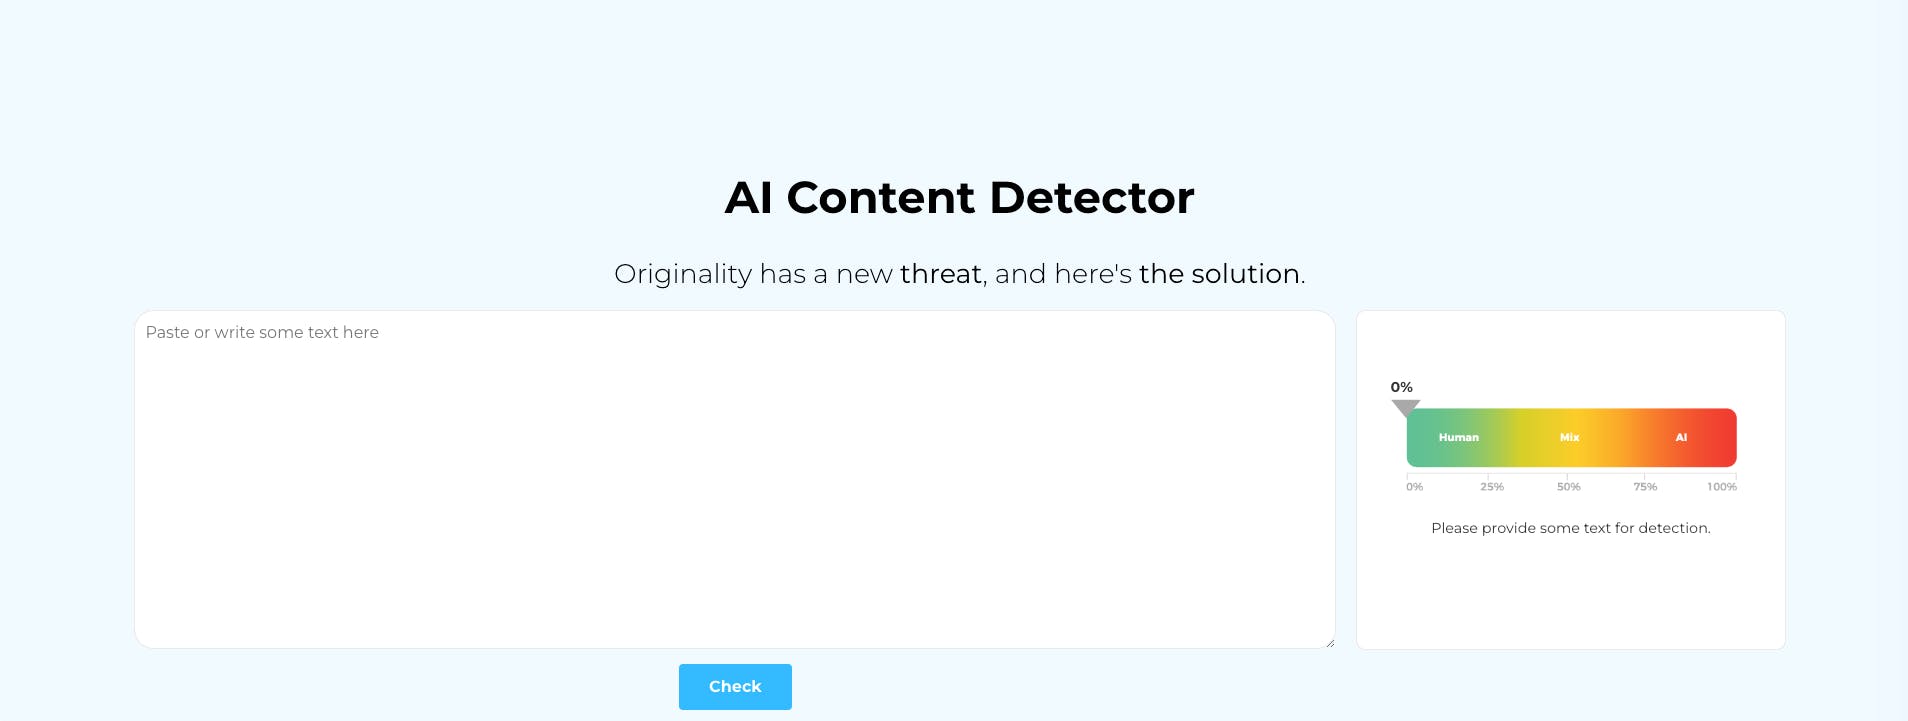 AI Content Detector from Crossplag media 3